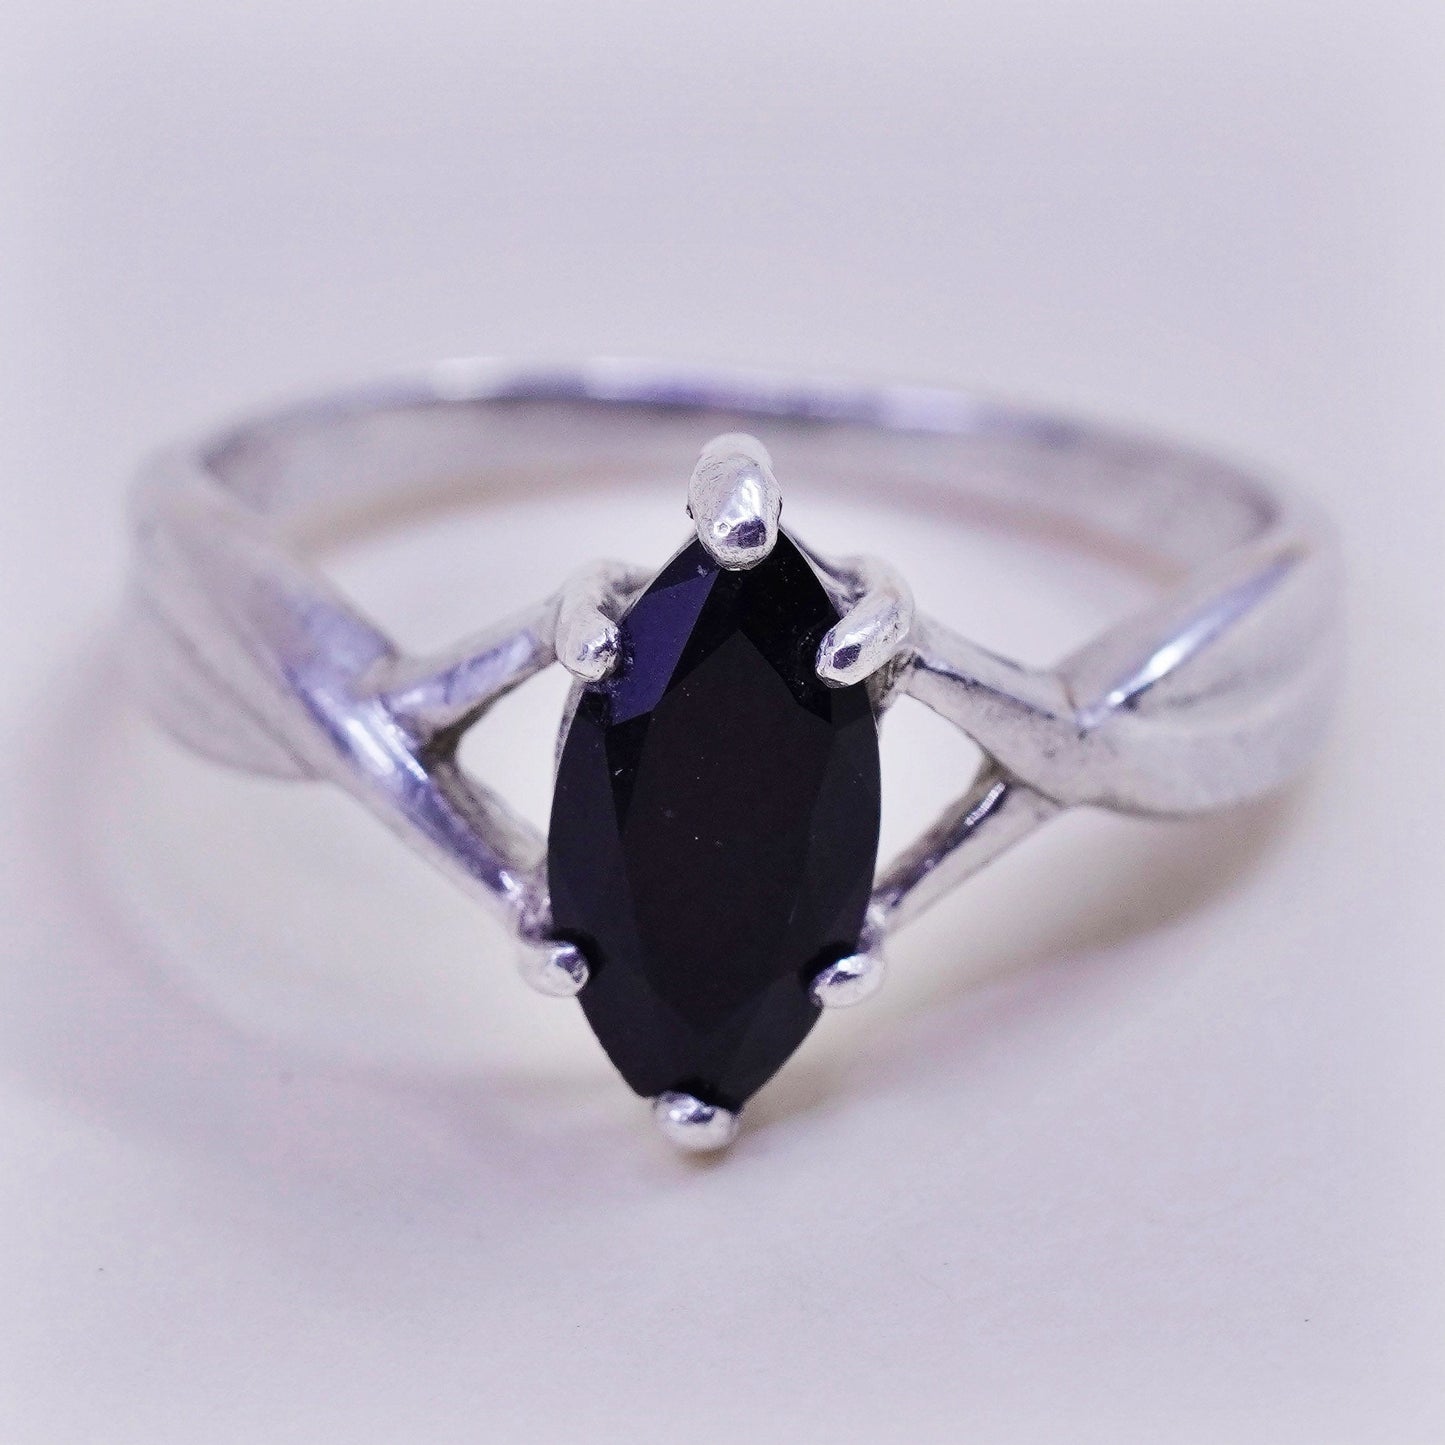 Size 6, Vintage sterling silver 925 ring with wavy obsidian